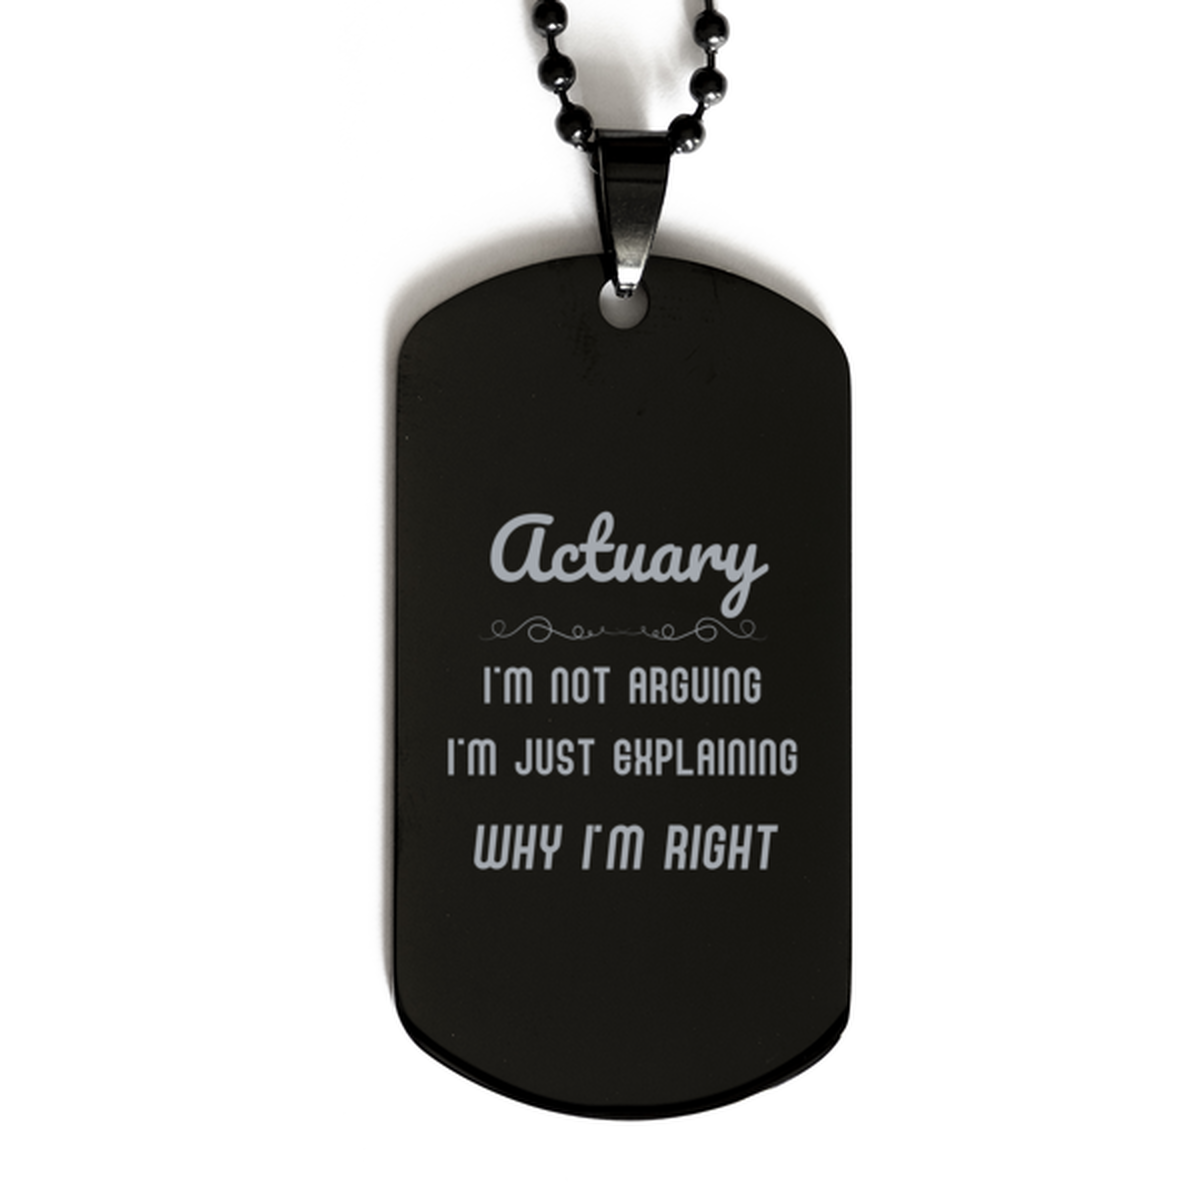 Actuary I'm not Arguing. I'm Just Explaining Why I'm RIGHT Black Dog Tag, Funny Saying Quote Actuary Gifts For Actuary Graduation Birthday Christmas Gifts for Men Women Coworker